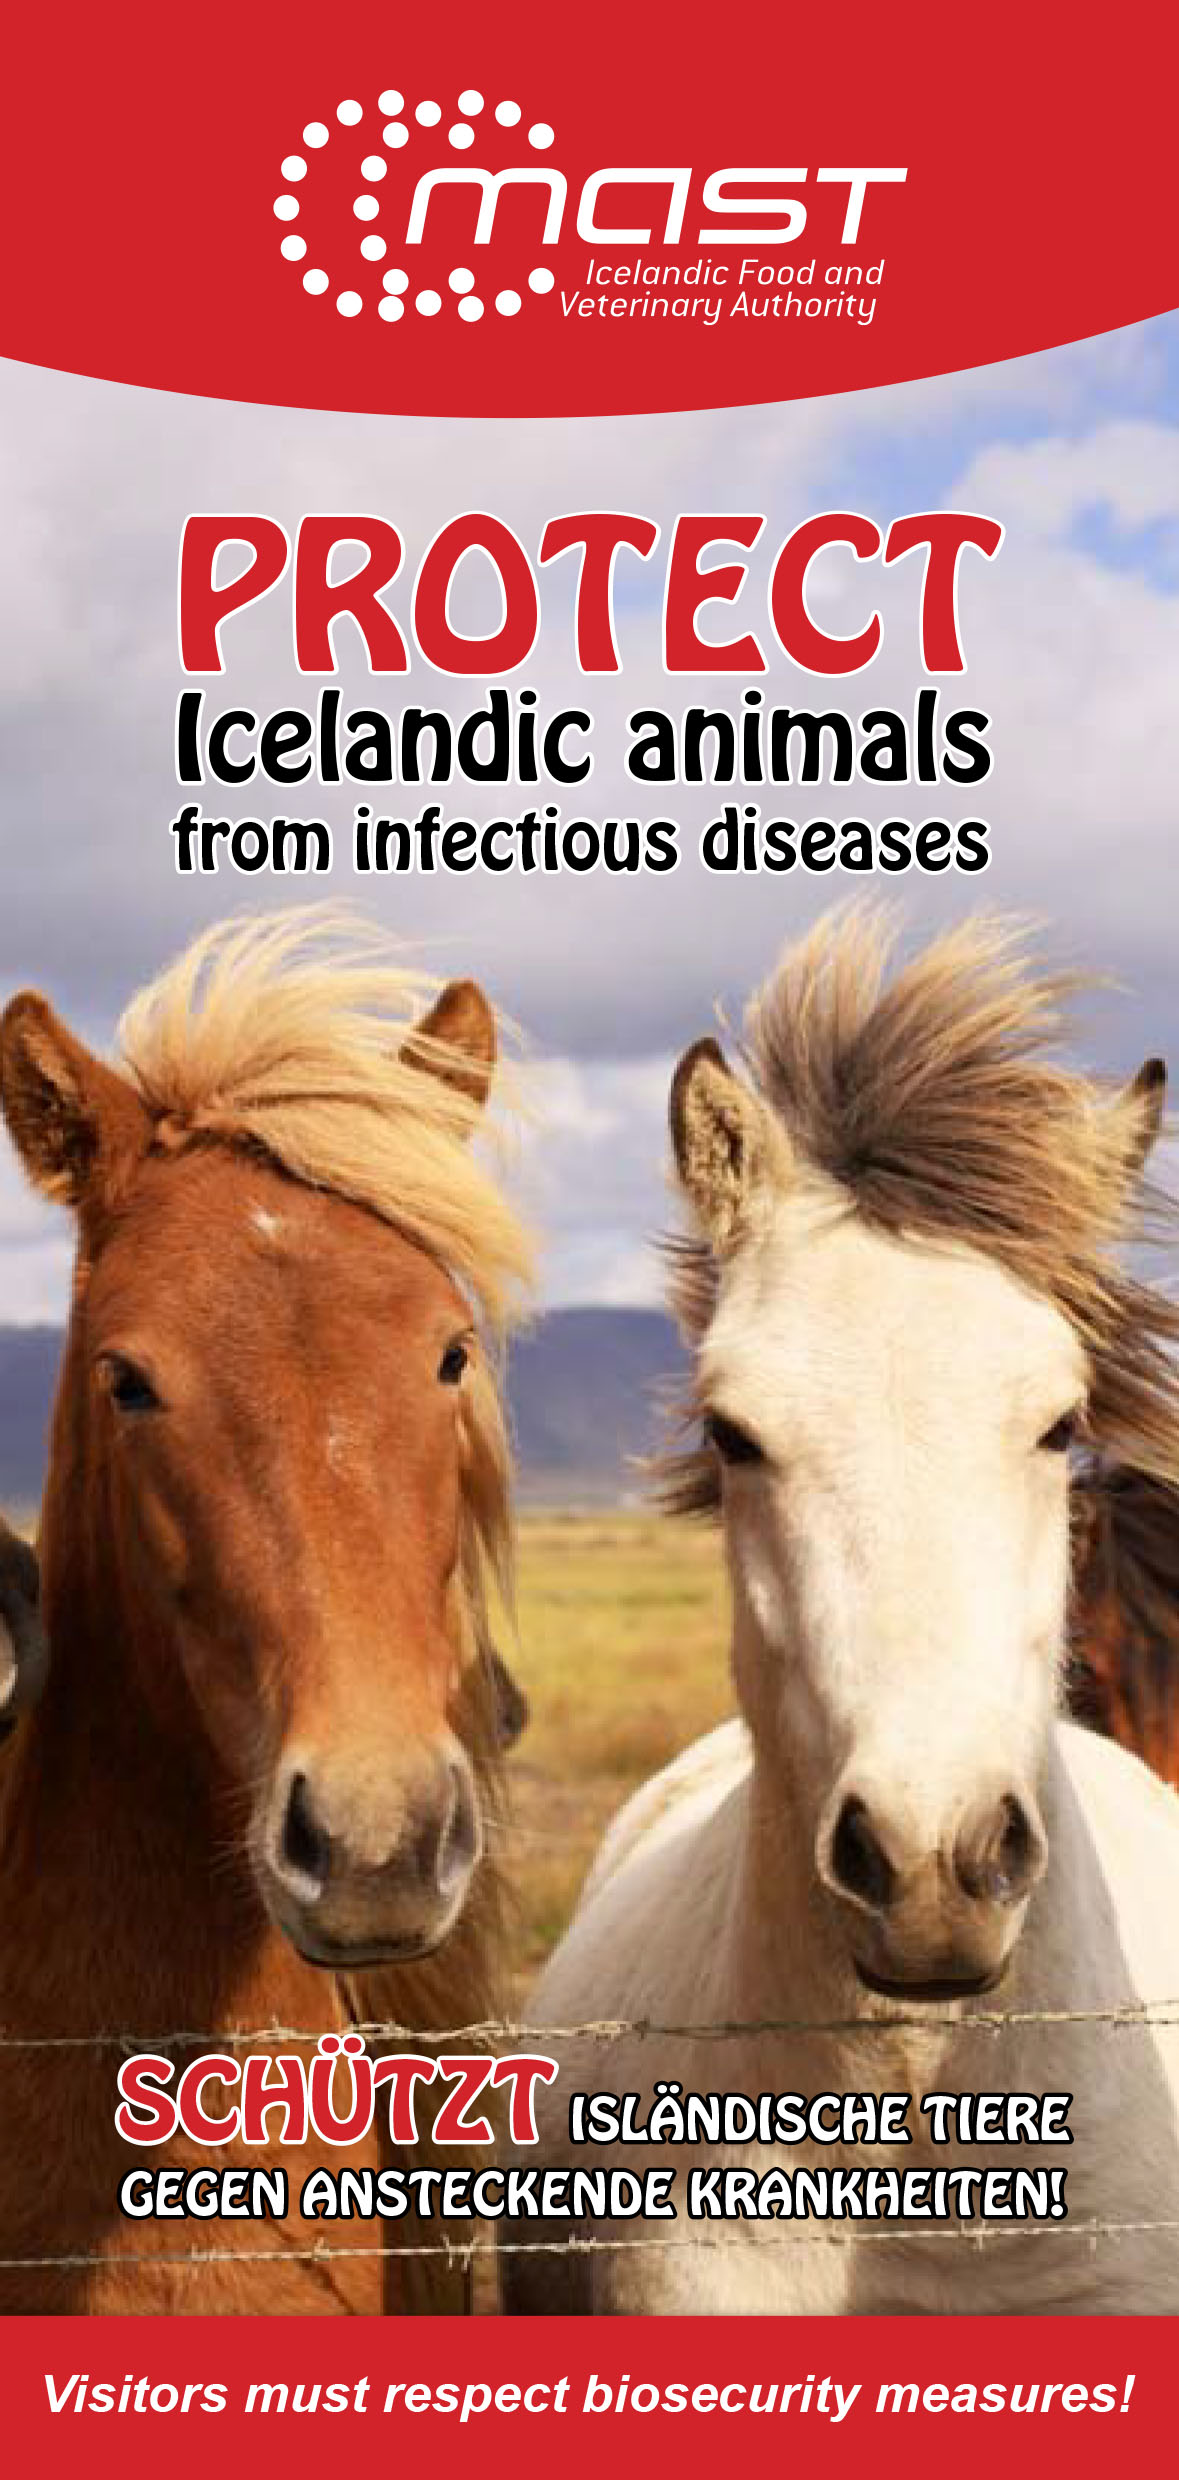 Protect Icelandic animals from infectious diseases